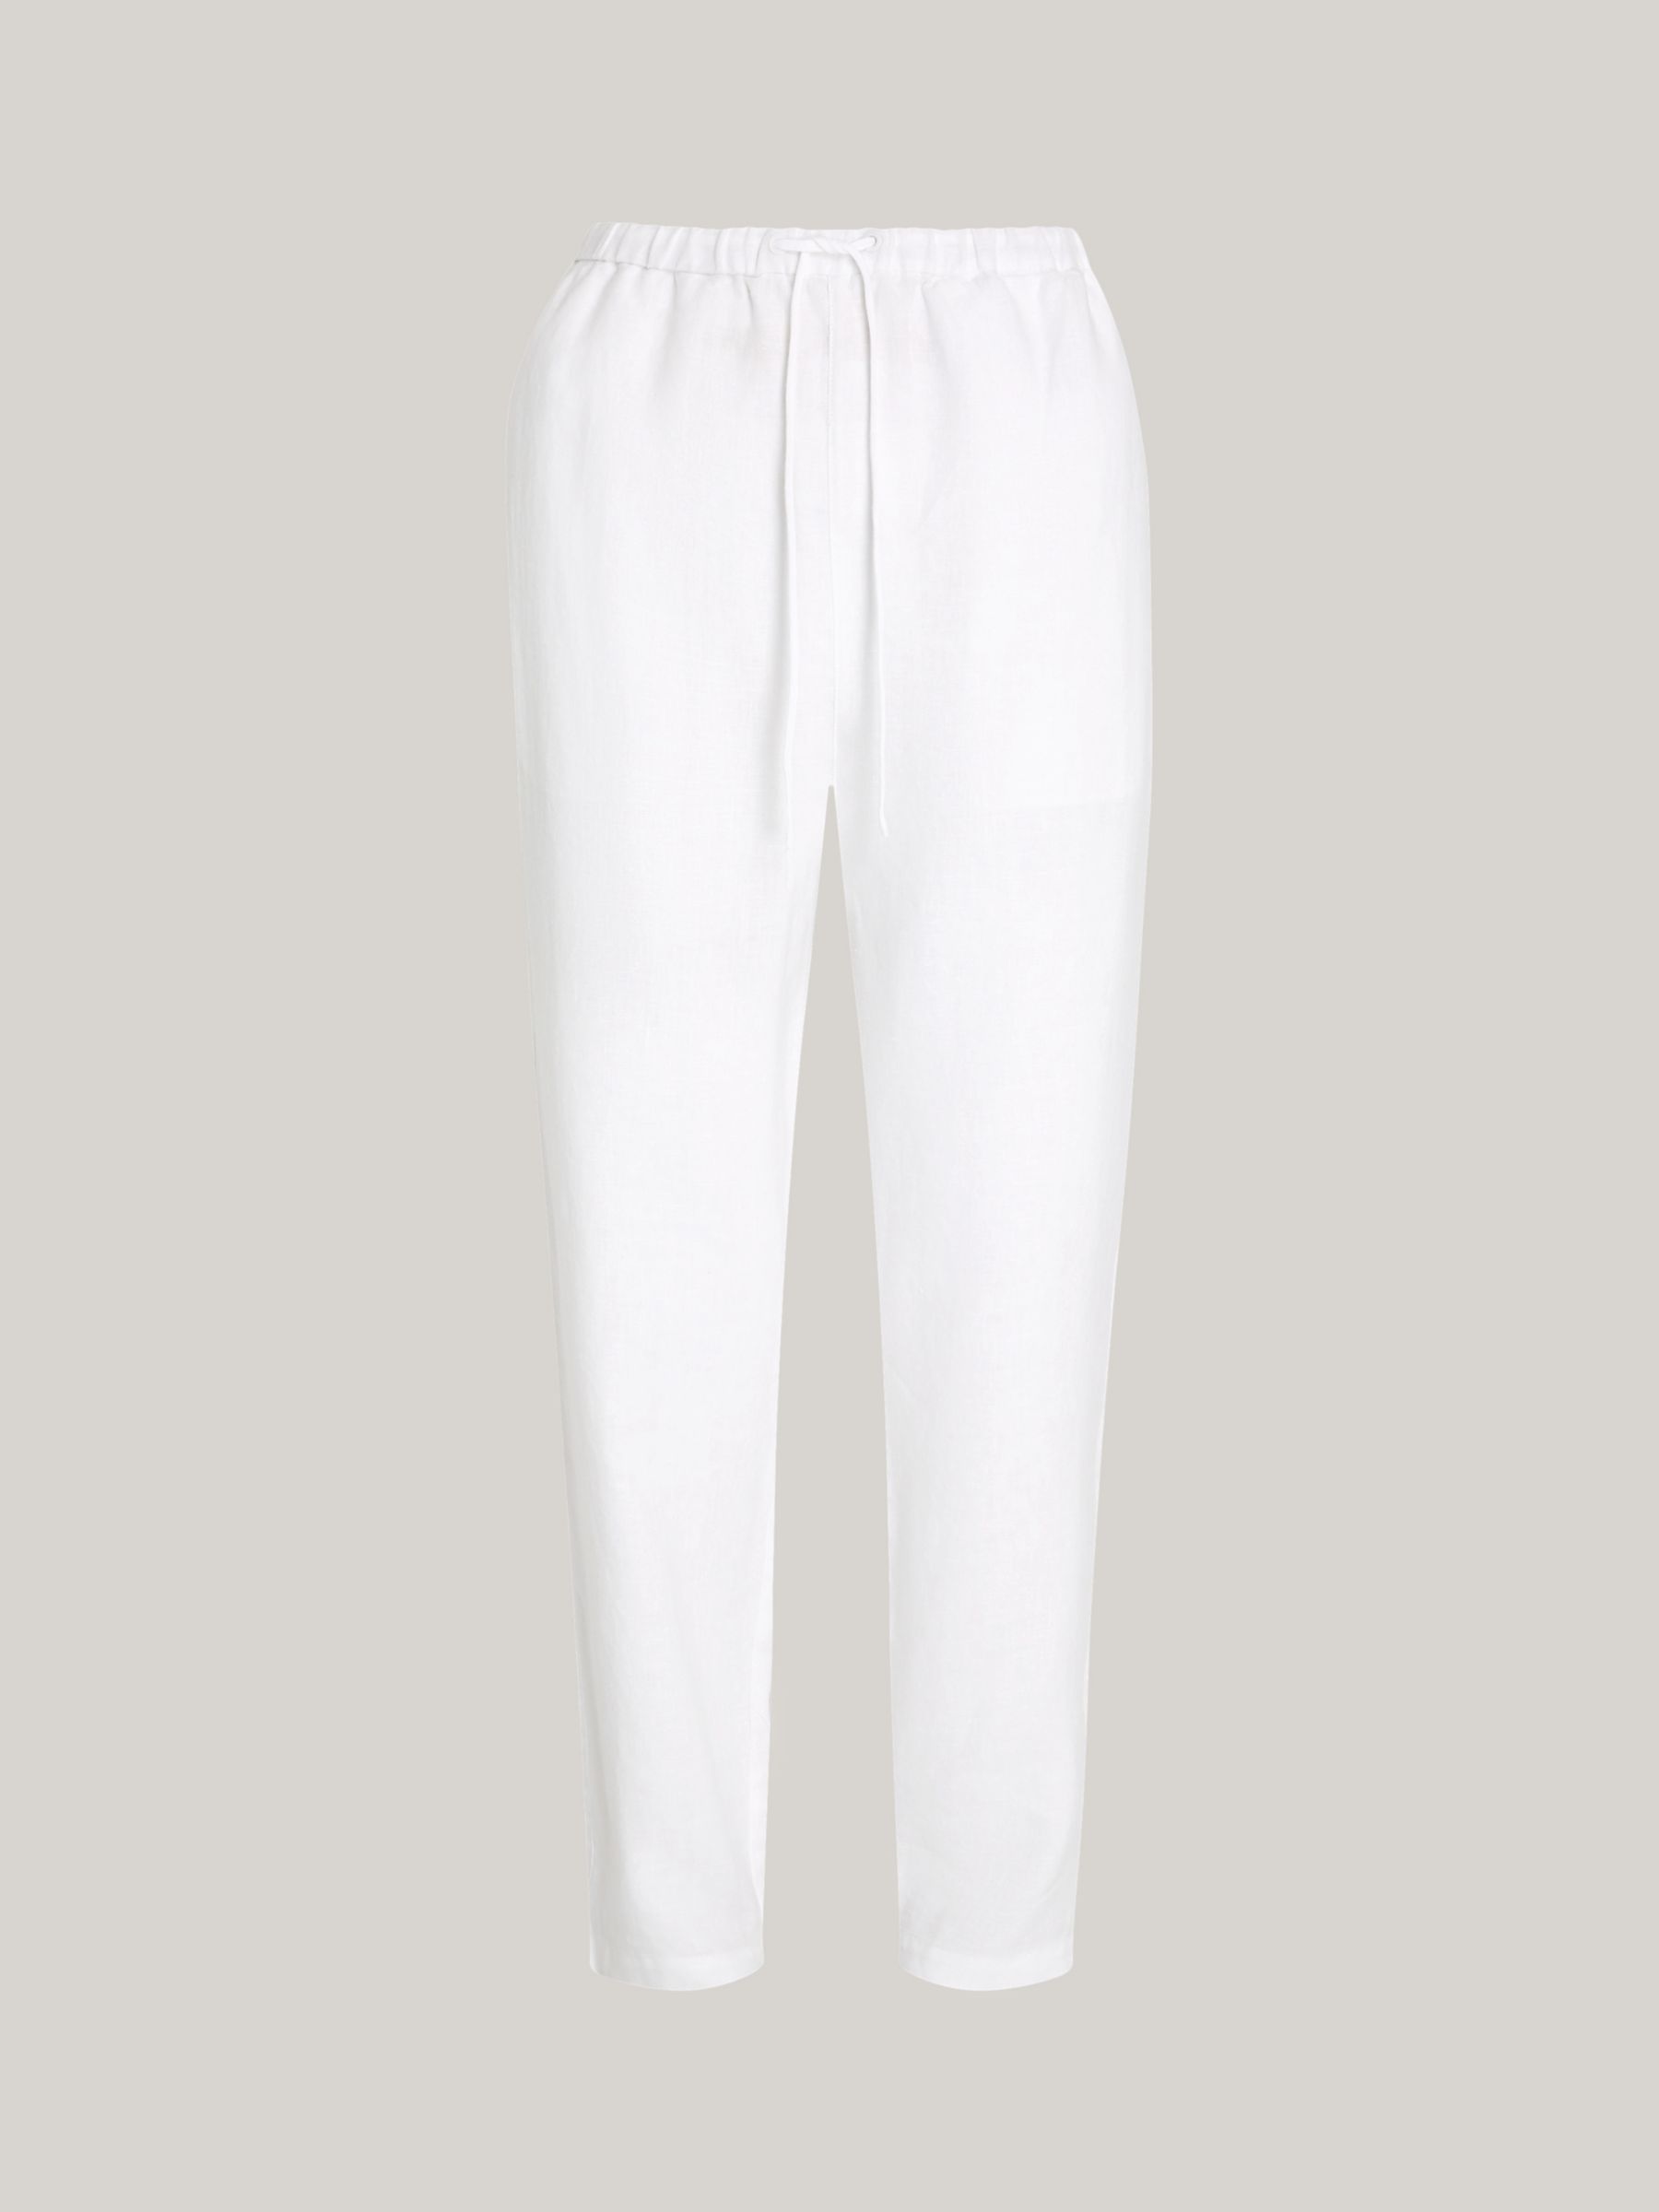 Tommy Hilfiger Linen Blend Drawstring Trousers, Optic White, 4